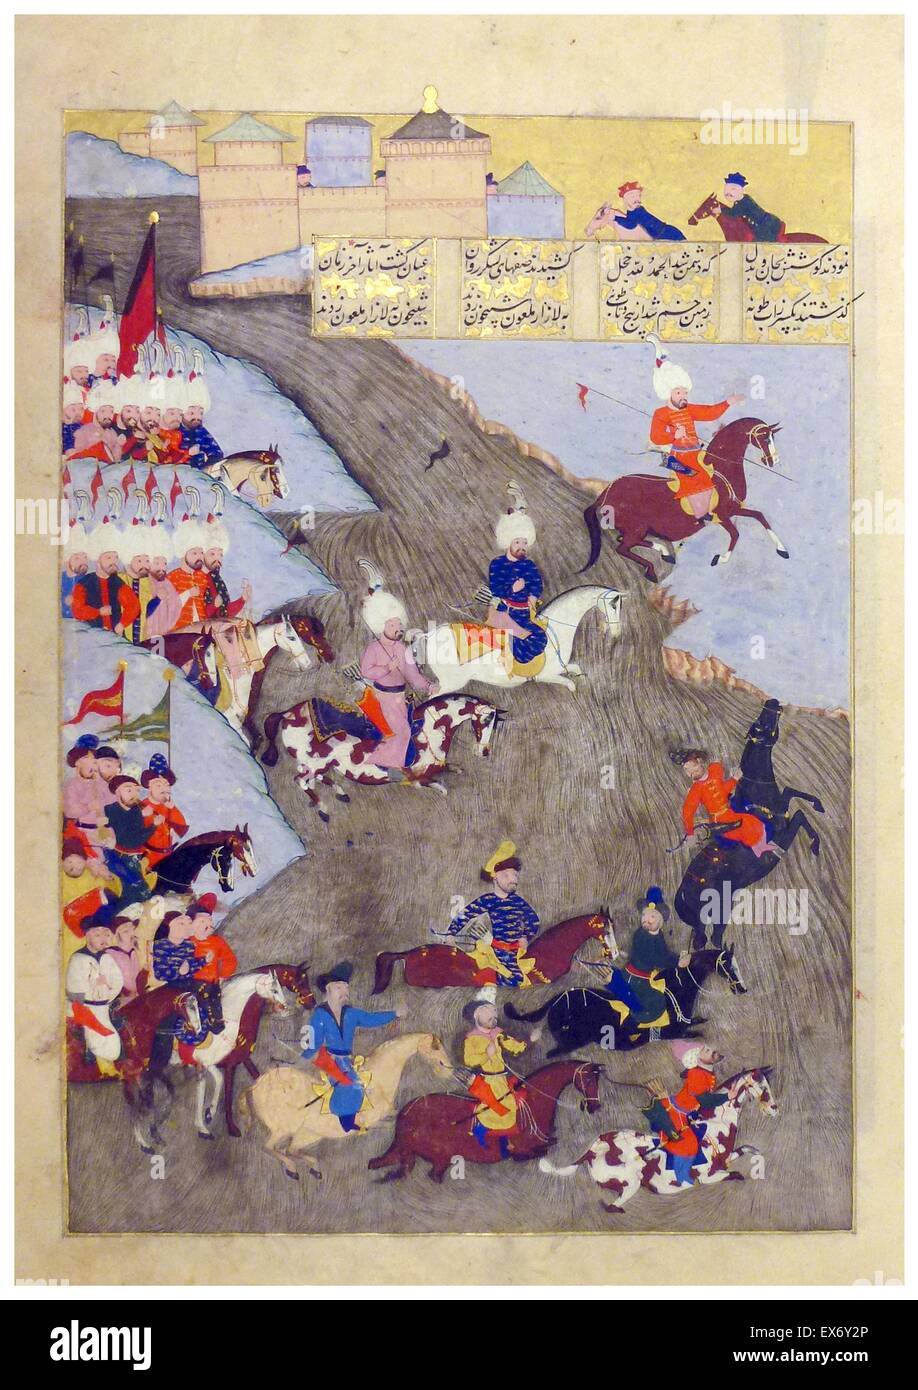 Below is one of the wonderful illuminations from the series, showing a river crossing on horseback. Briefly, it's a Turkish manuscript dating from 1579 (AH 987), commorating the life and deeds of Sultan Suleiman the Magnificent, who had died just 13 years Stock Photo